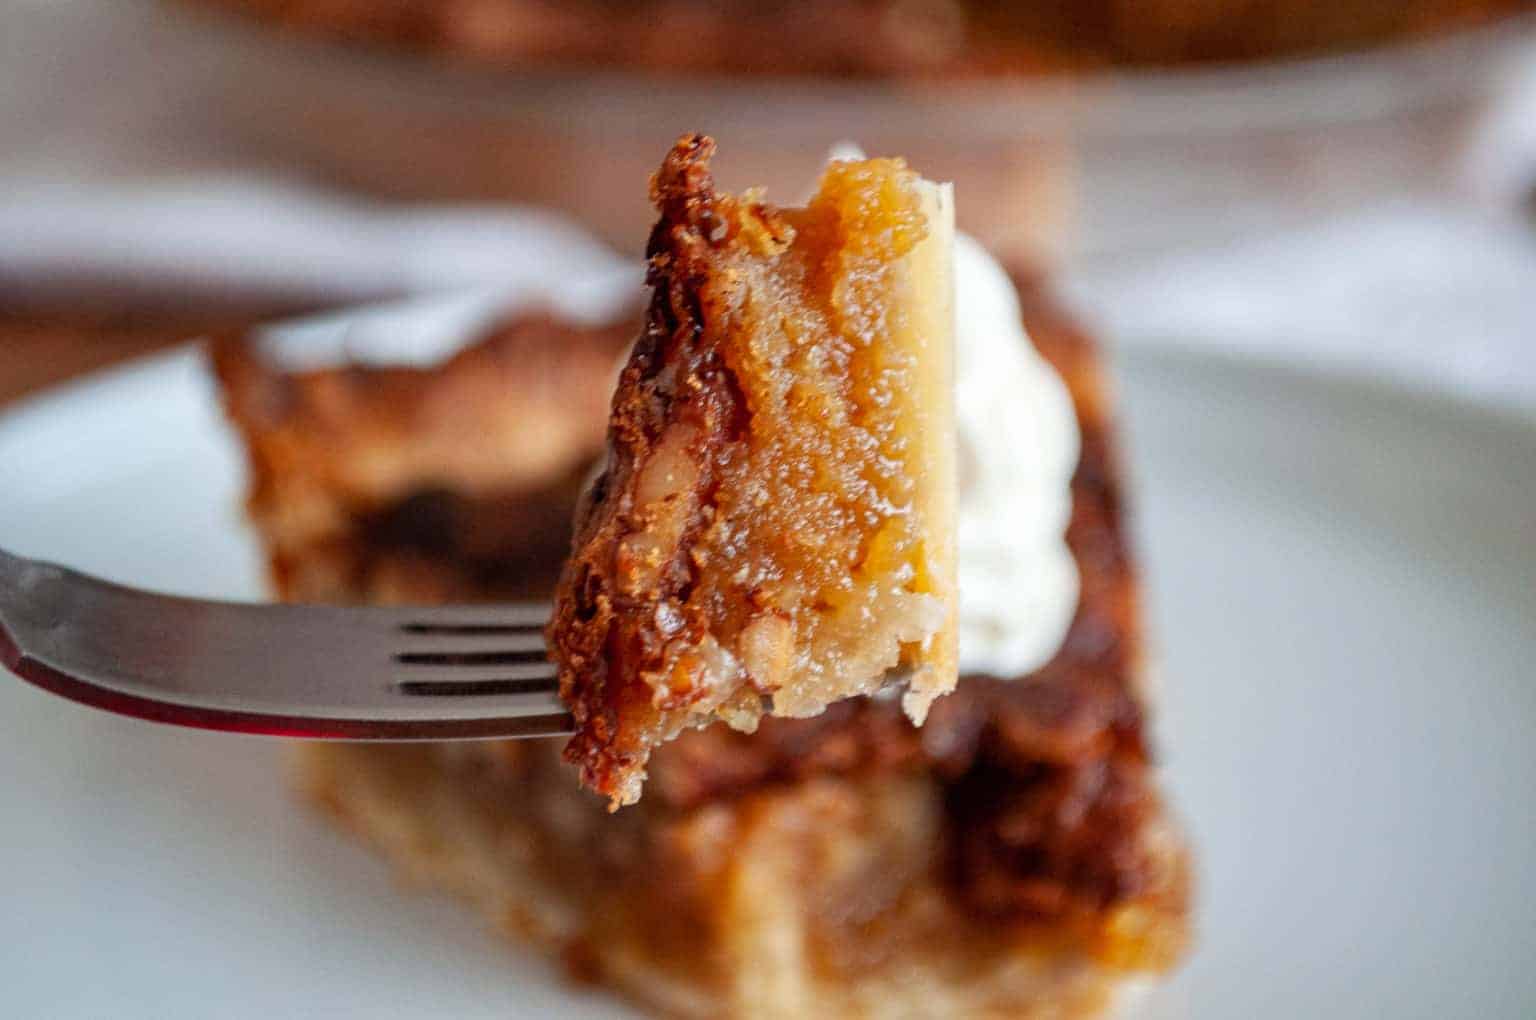 A bite pecan pie on a fork.